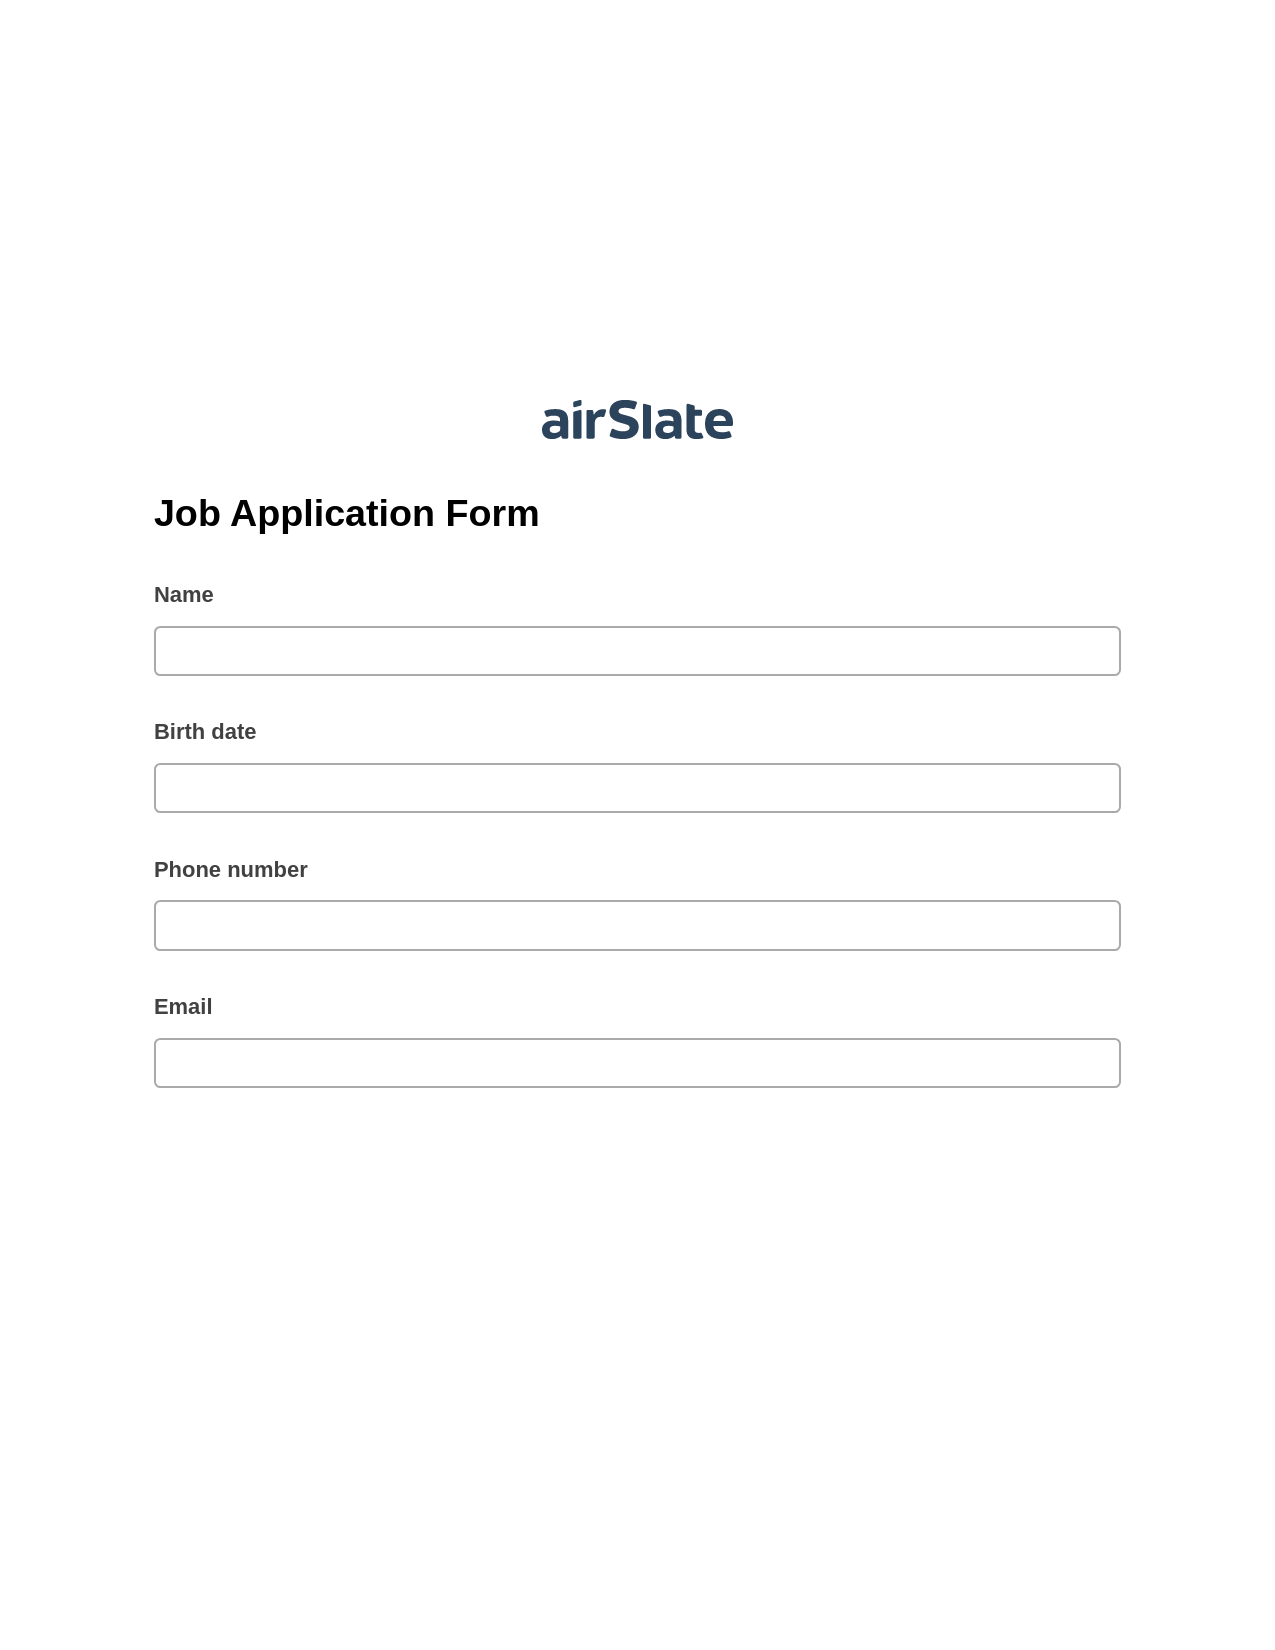 Job Application Form Pre-fill from MySQL Dropdown Options Bot, Create slate addon, Export to Excel 365 Bot